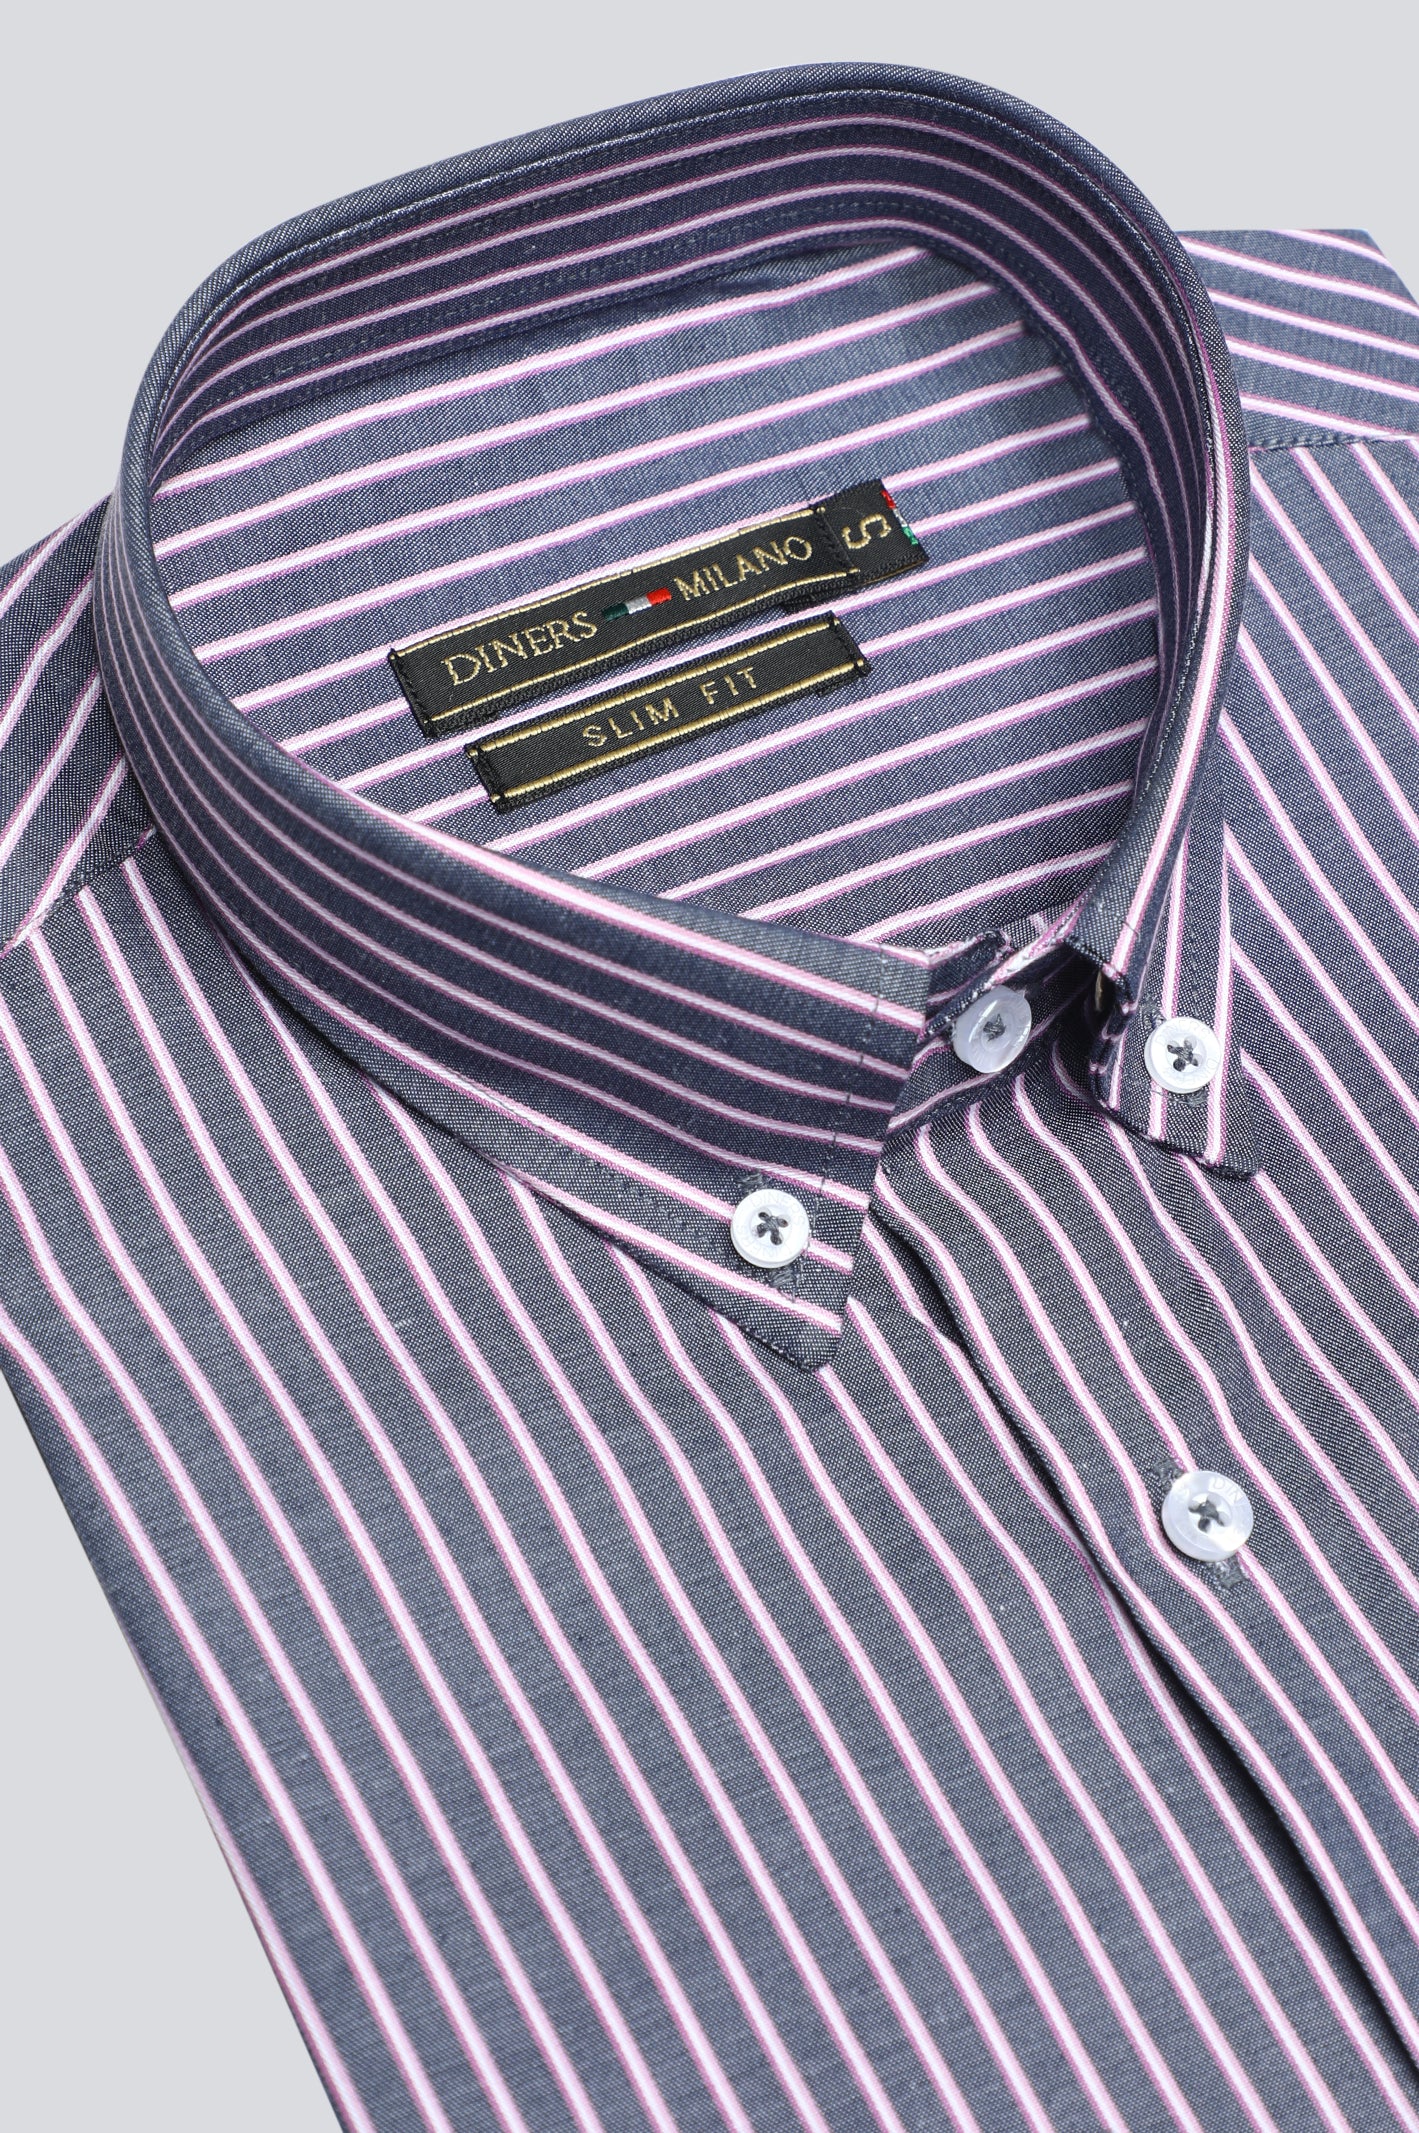 Multicolor Stripe Casual Milano Shirt From Diners